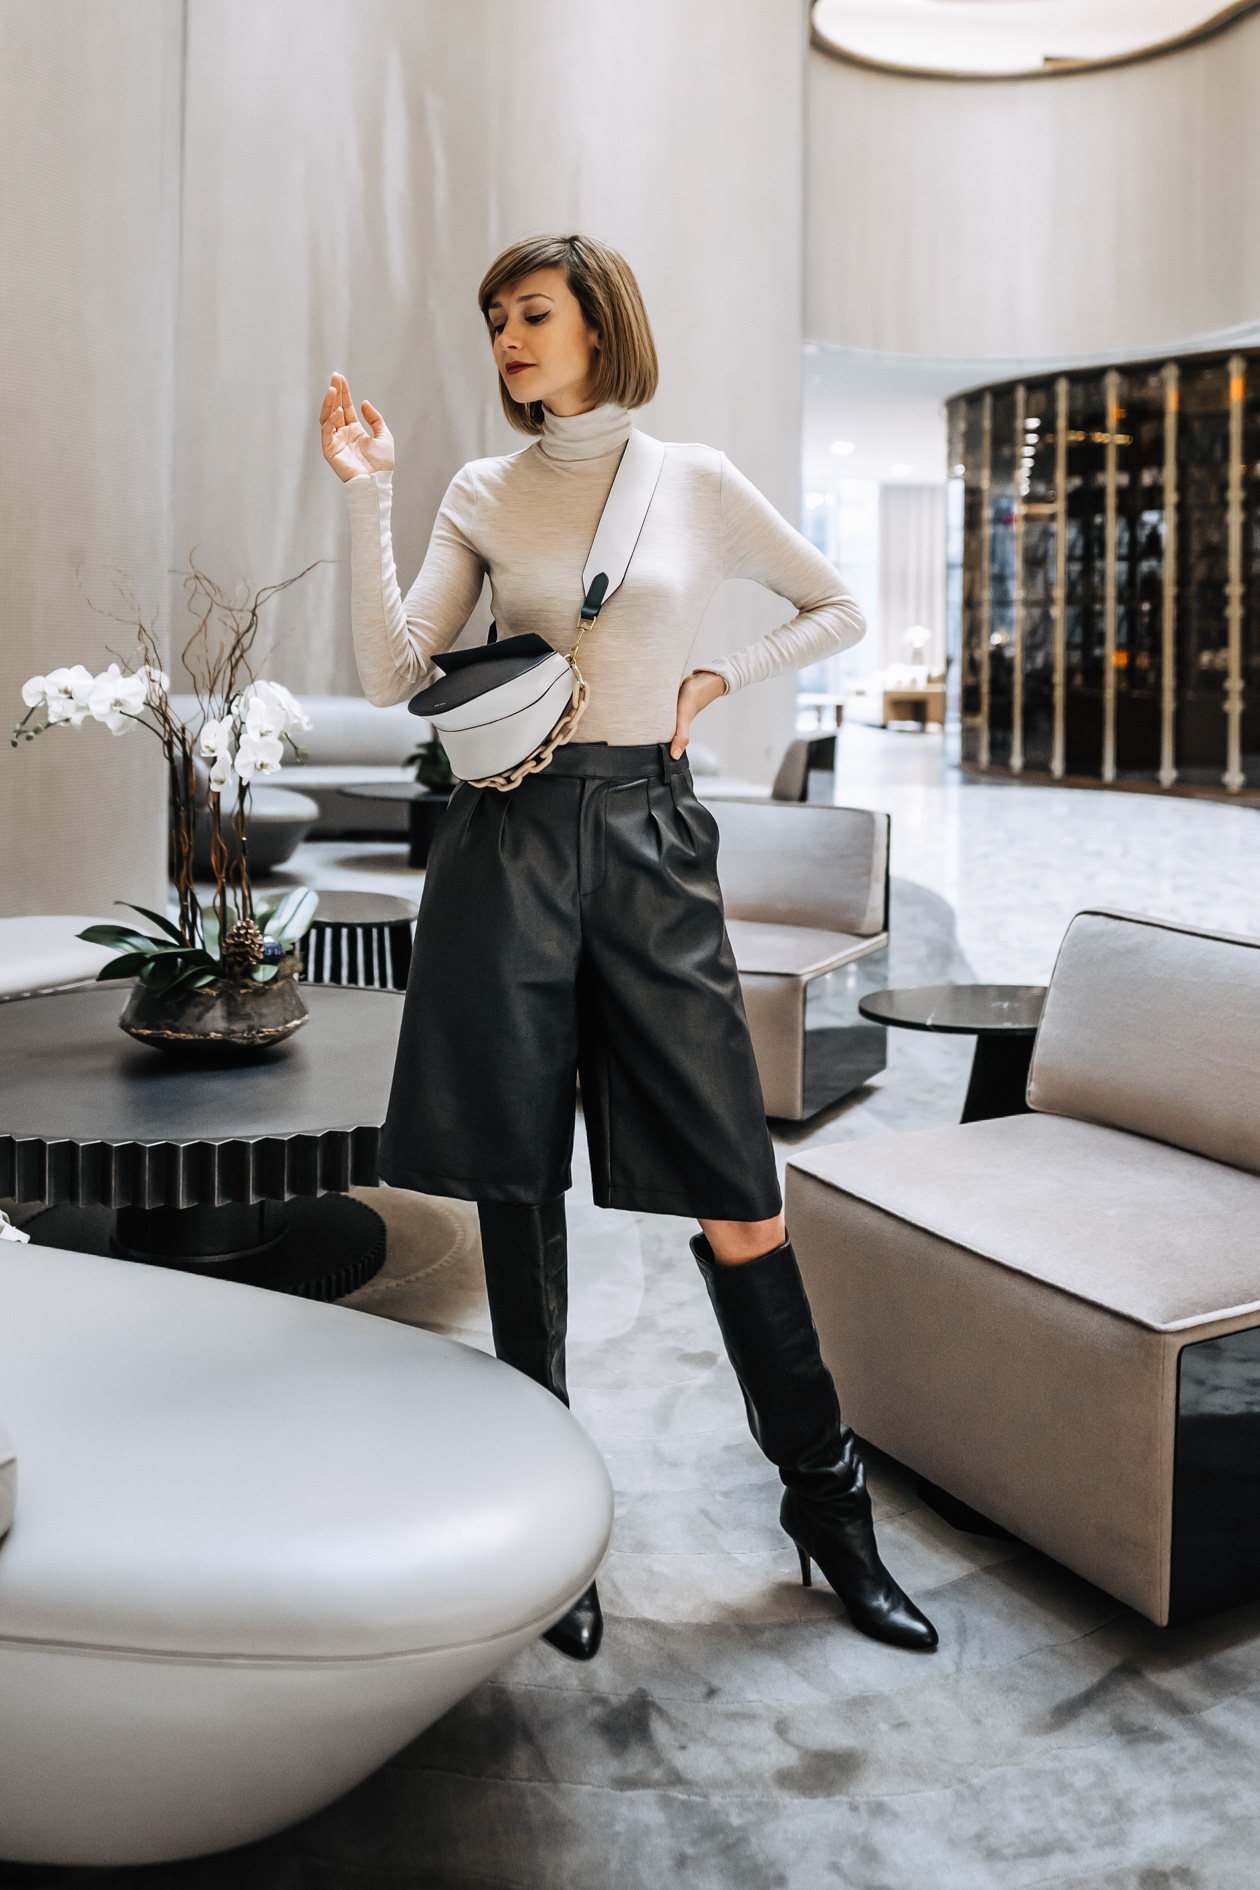 styling leather shorts for winter (and beyond) - District of Chic